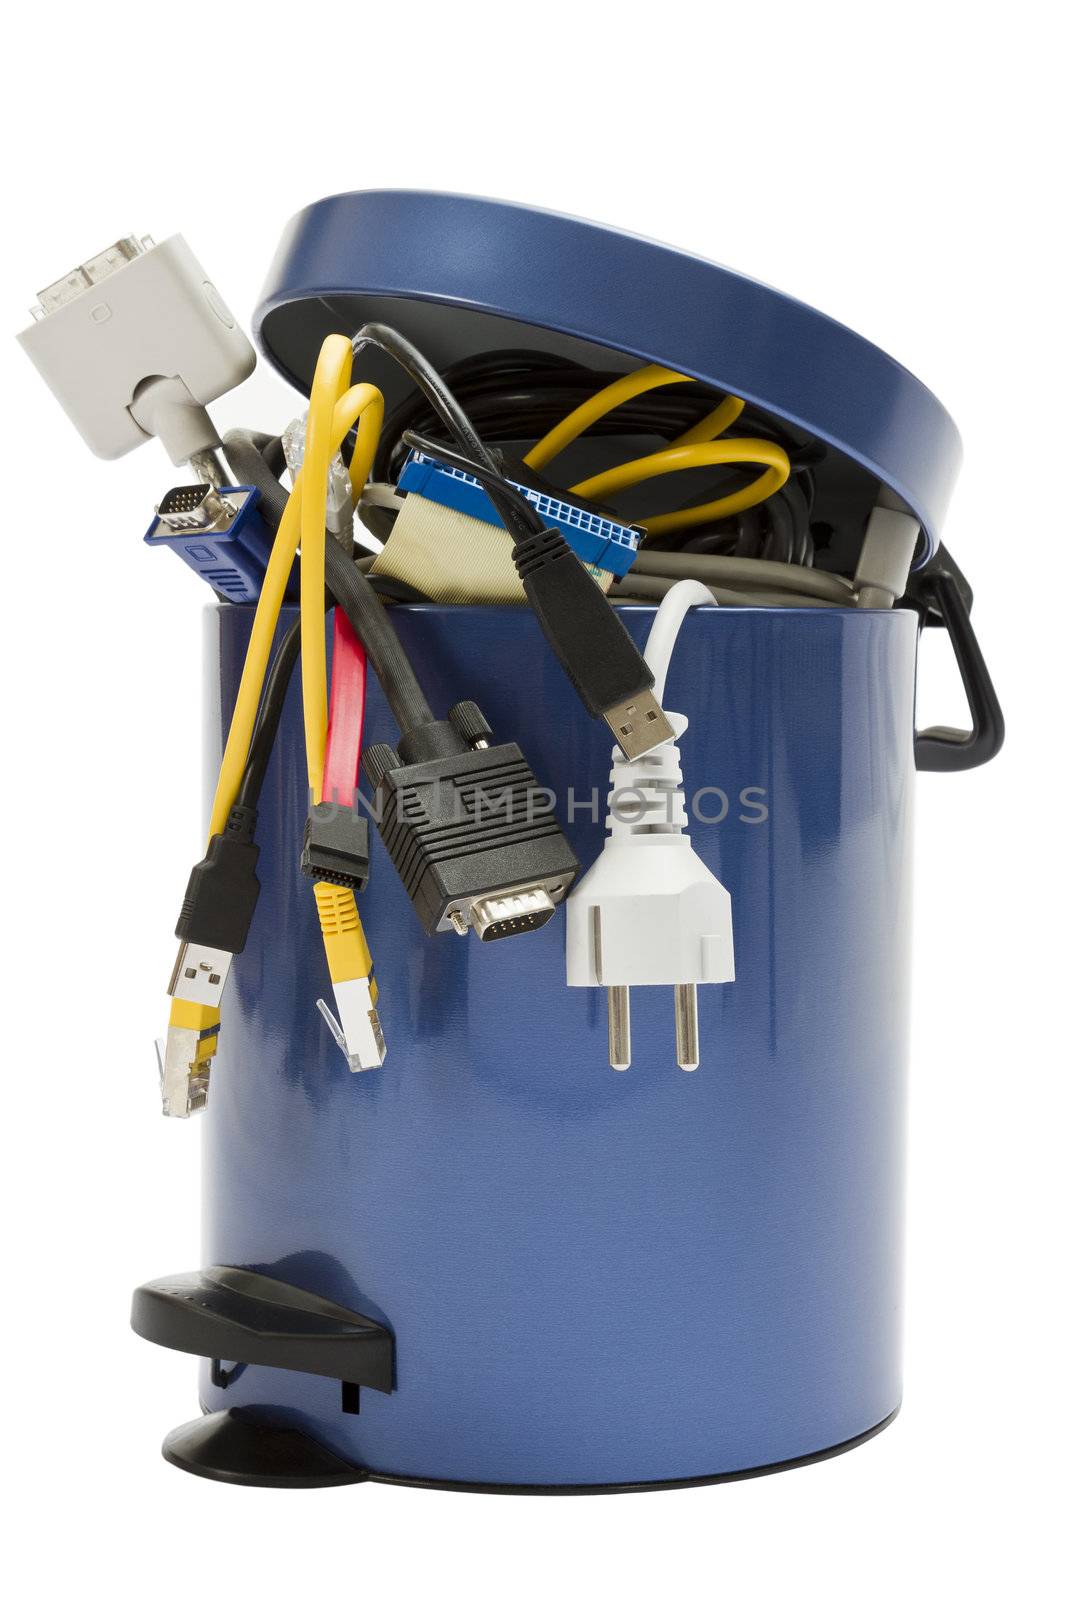 trashcan with electronic waste by gewoldi